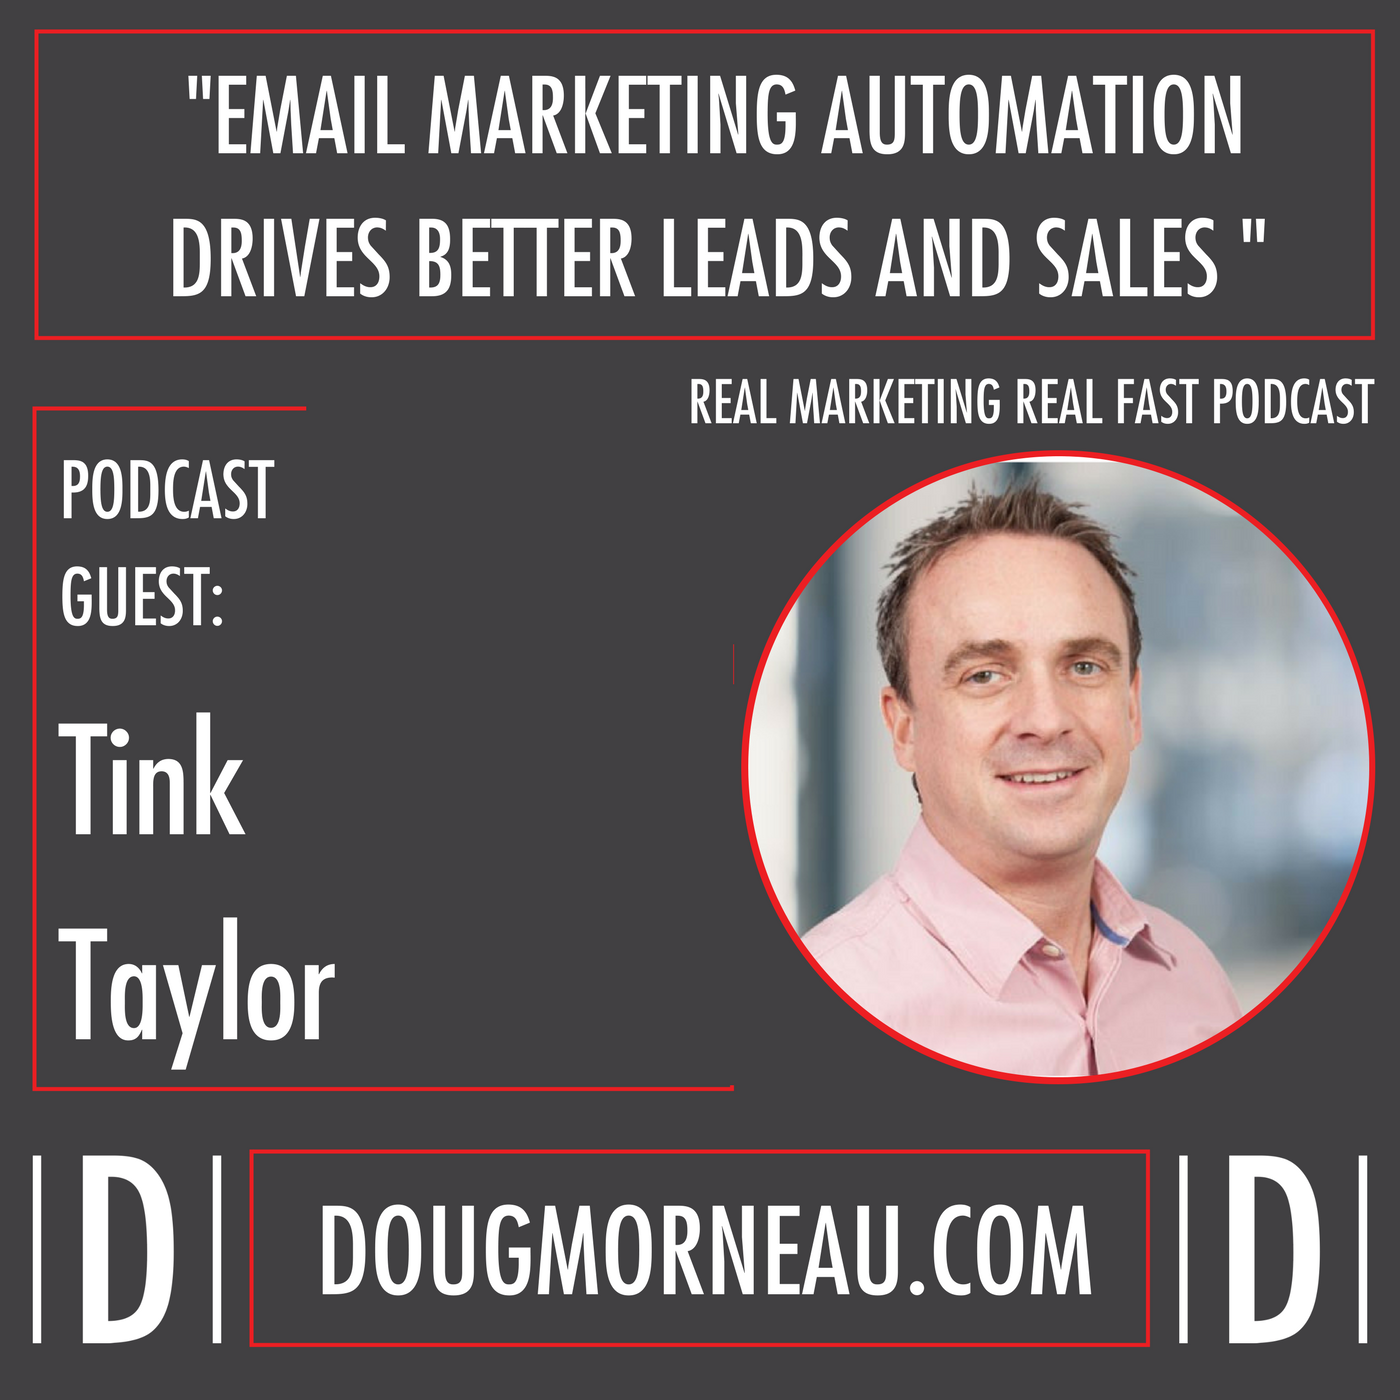 EMAIL MARKETING AUTOMATION DRIVES BETTER LEADS AND SALES - REAL MARKETING REAL FAST PODCAST